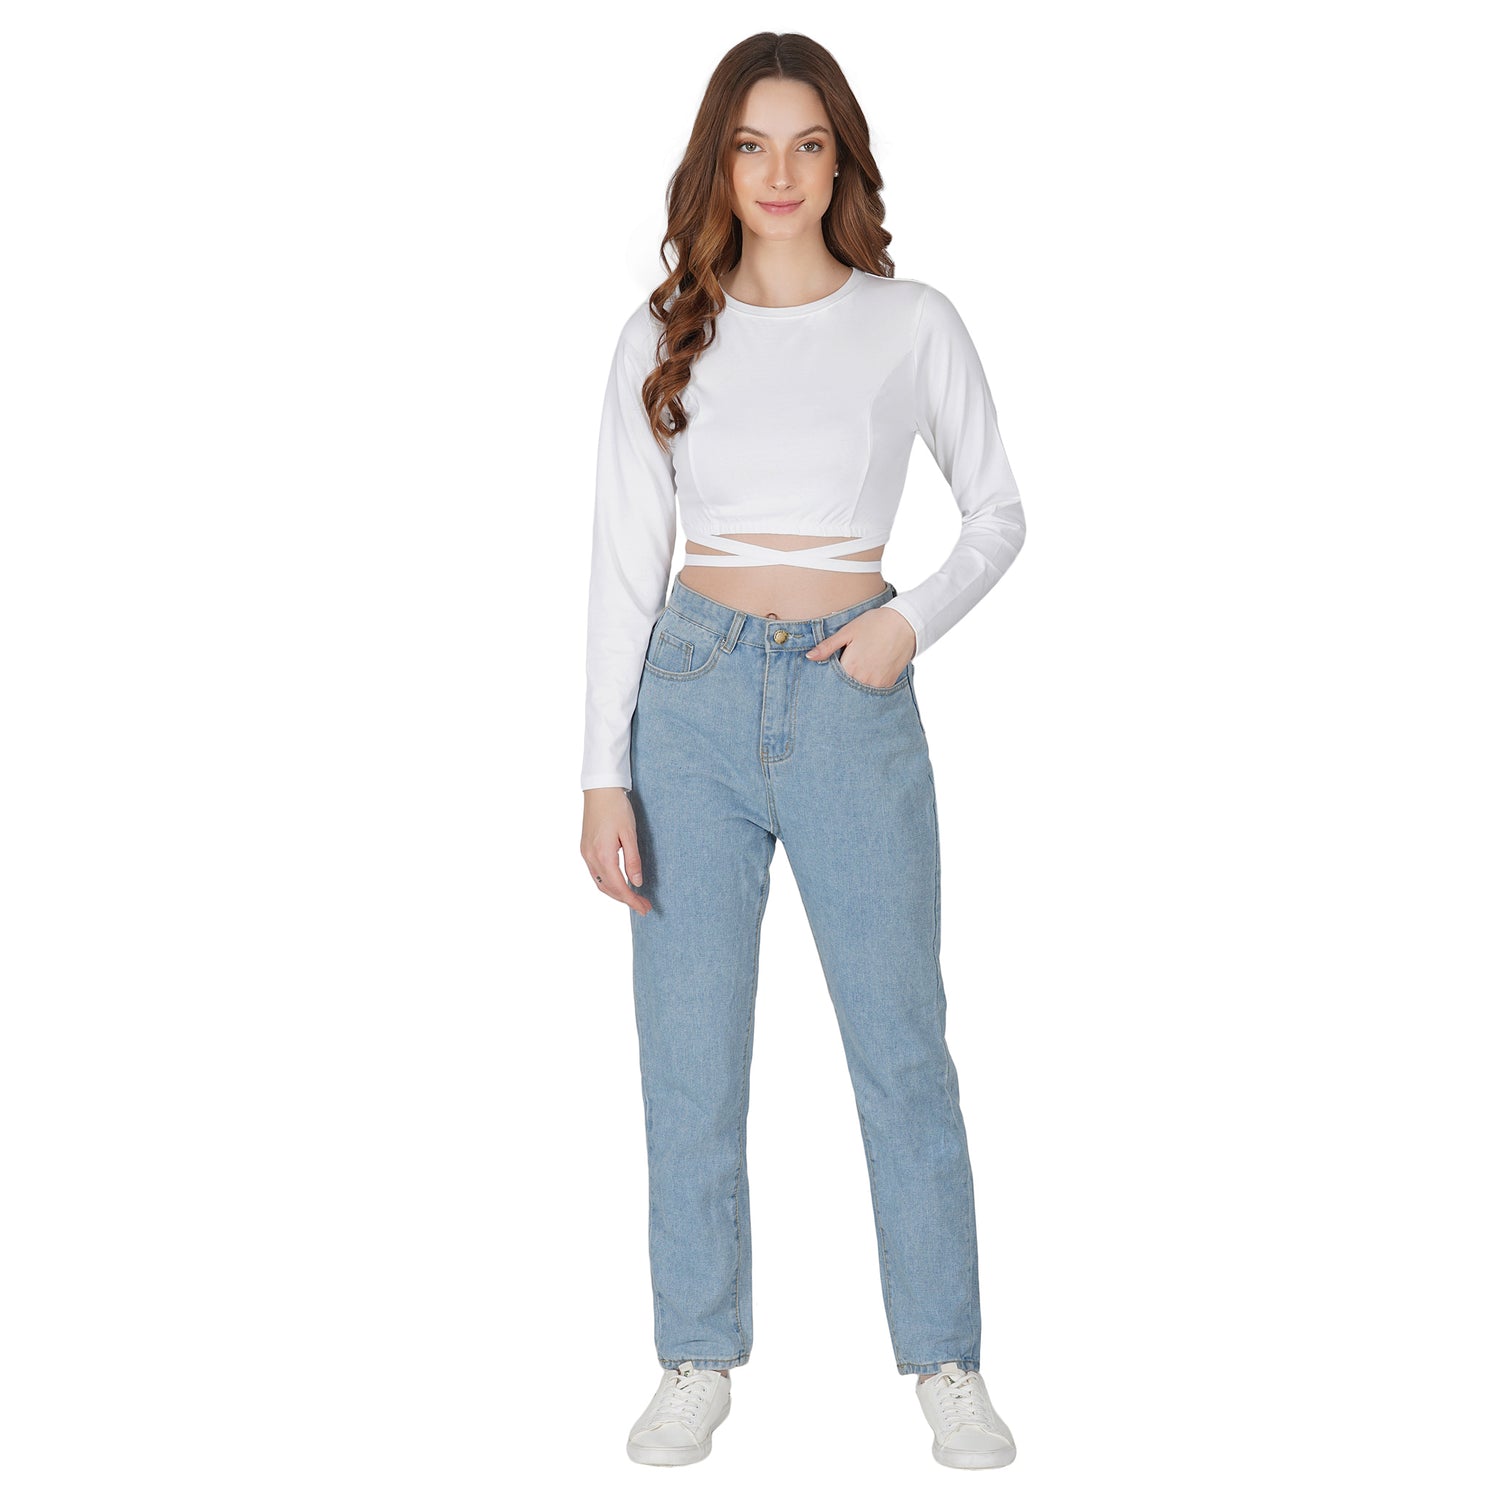 SLAY. Women's White Full Sleeves Crop Top with Back Wrap around Strings-clothing-to-slay.myshopify.com-Crop Top